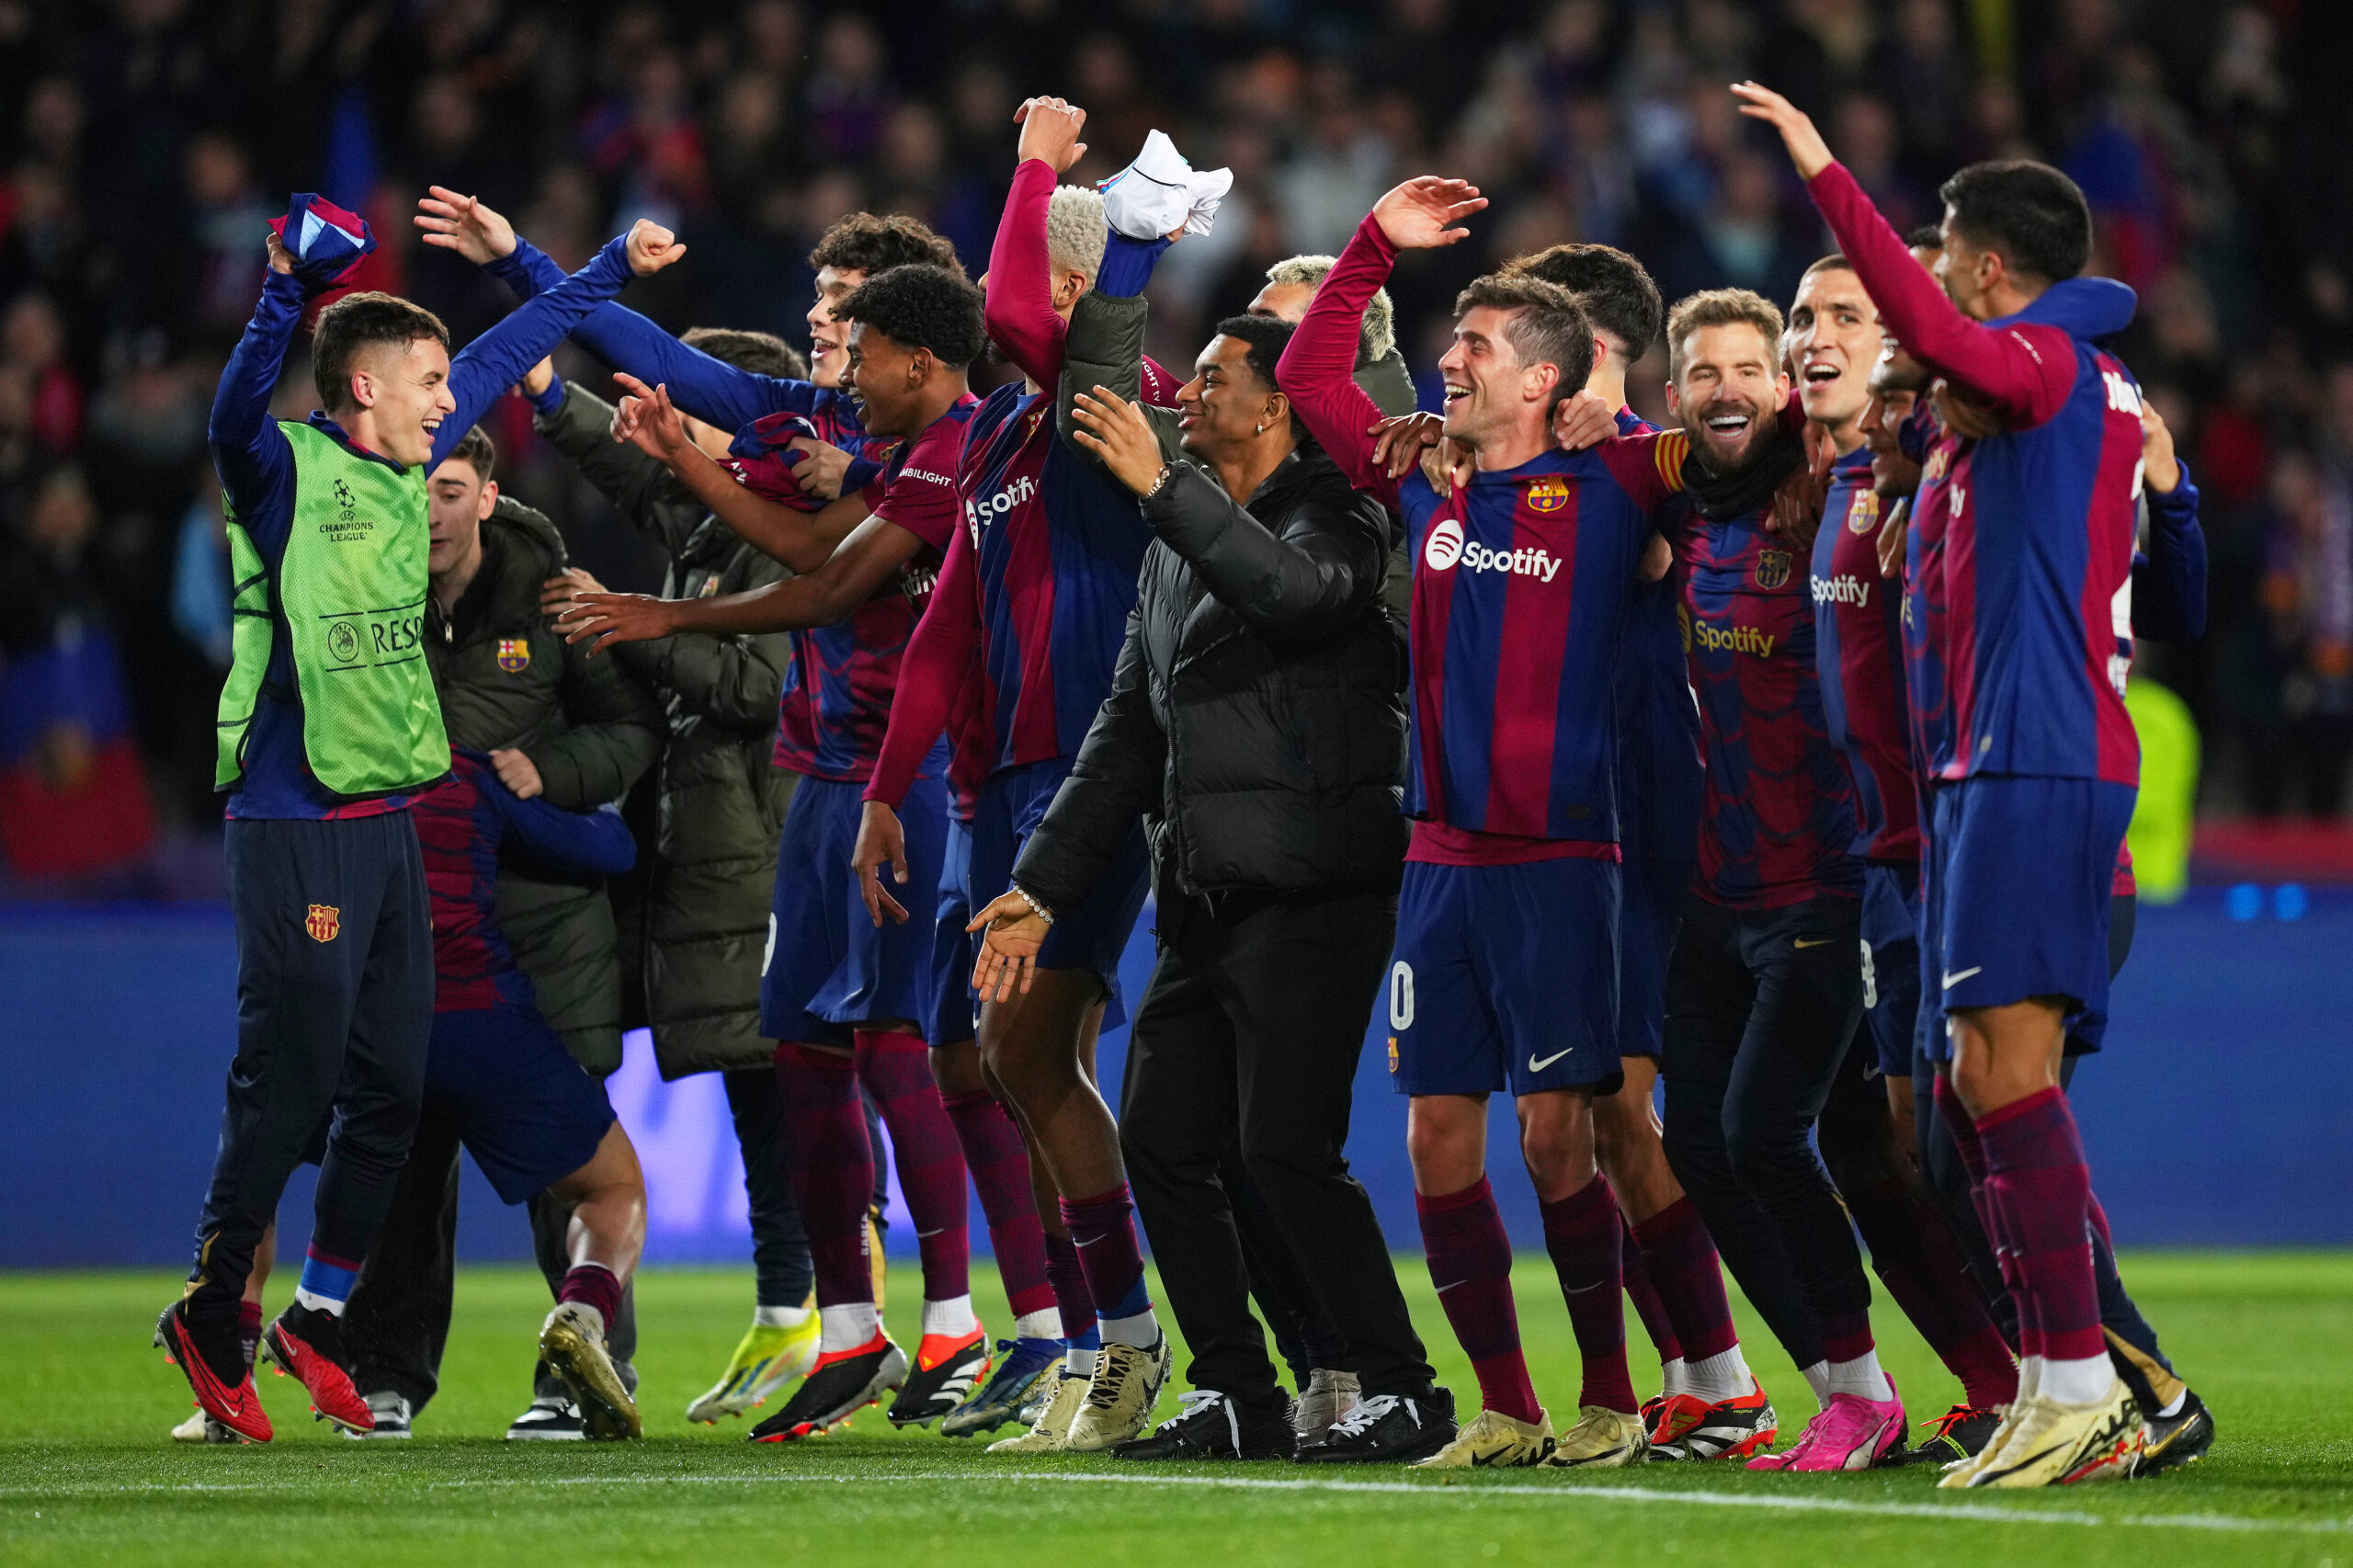 BARCELONA, SPAIN - MARCH 12: The players of FC Barcelona celebrate at full-time following the team's victory in the UEFA Champions League 2023/24 round of 16 second leg match between FC Barcelona and SSC Napoli at Estadi Olimpic Lluis Companys on March 12, 2024 in Barcelona, Spain.